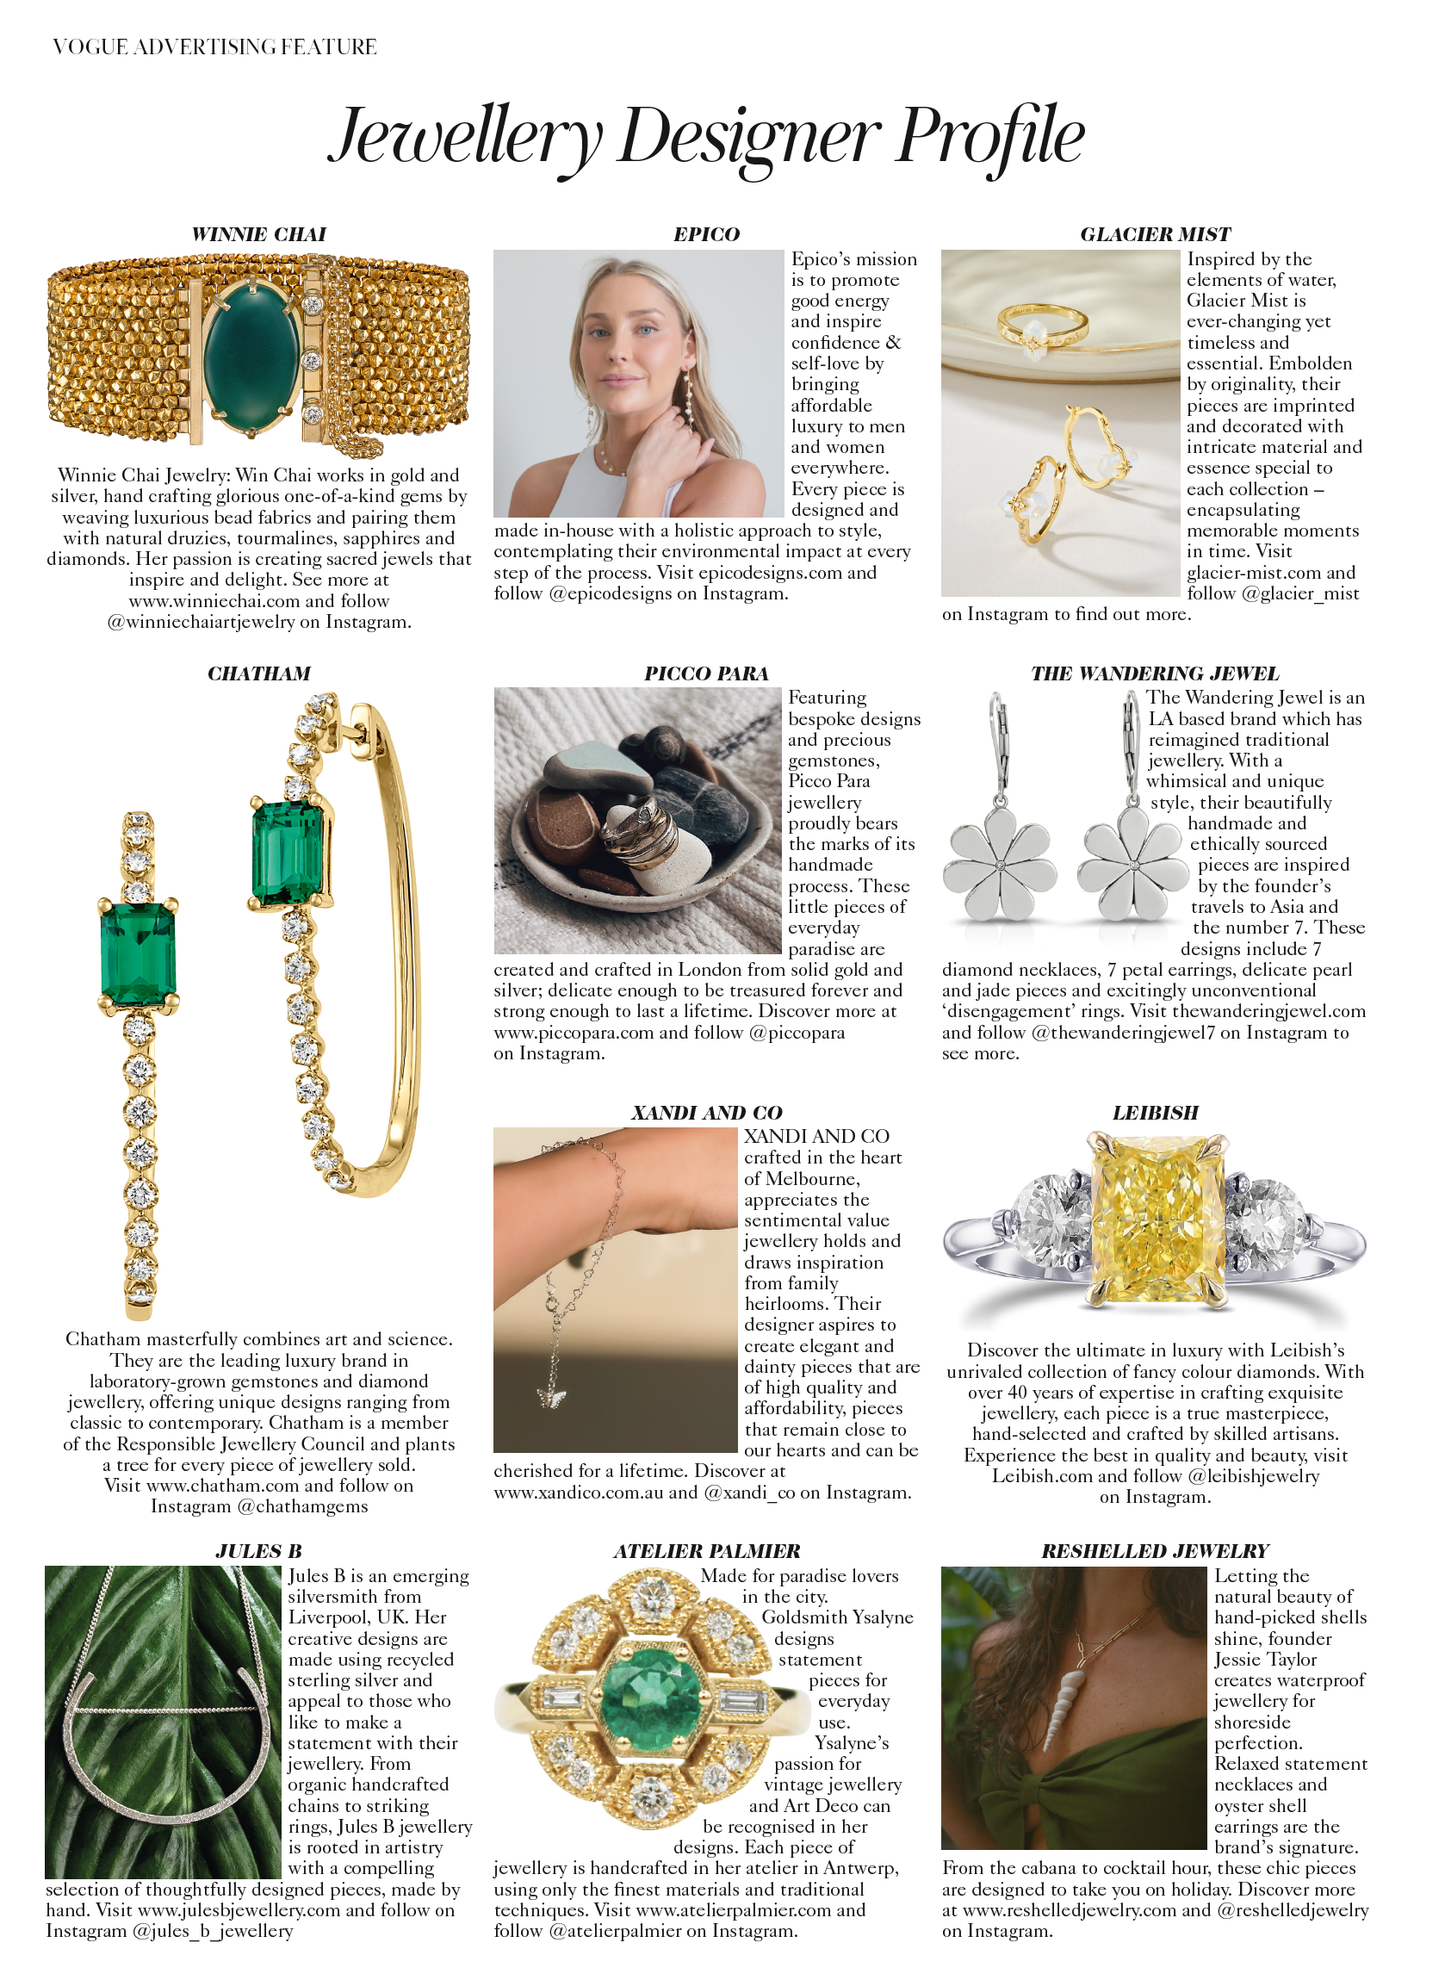 vogue magazine Jewelry designer profile featuring the 7 petal earrings from the wandering jewel